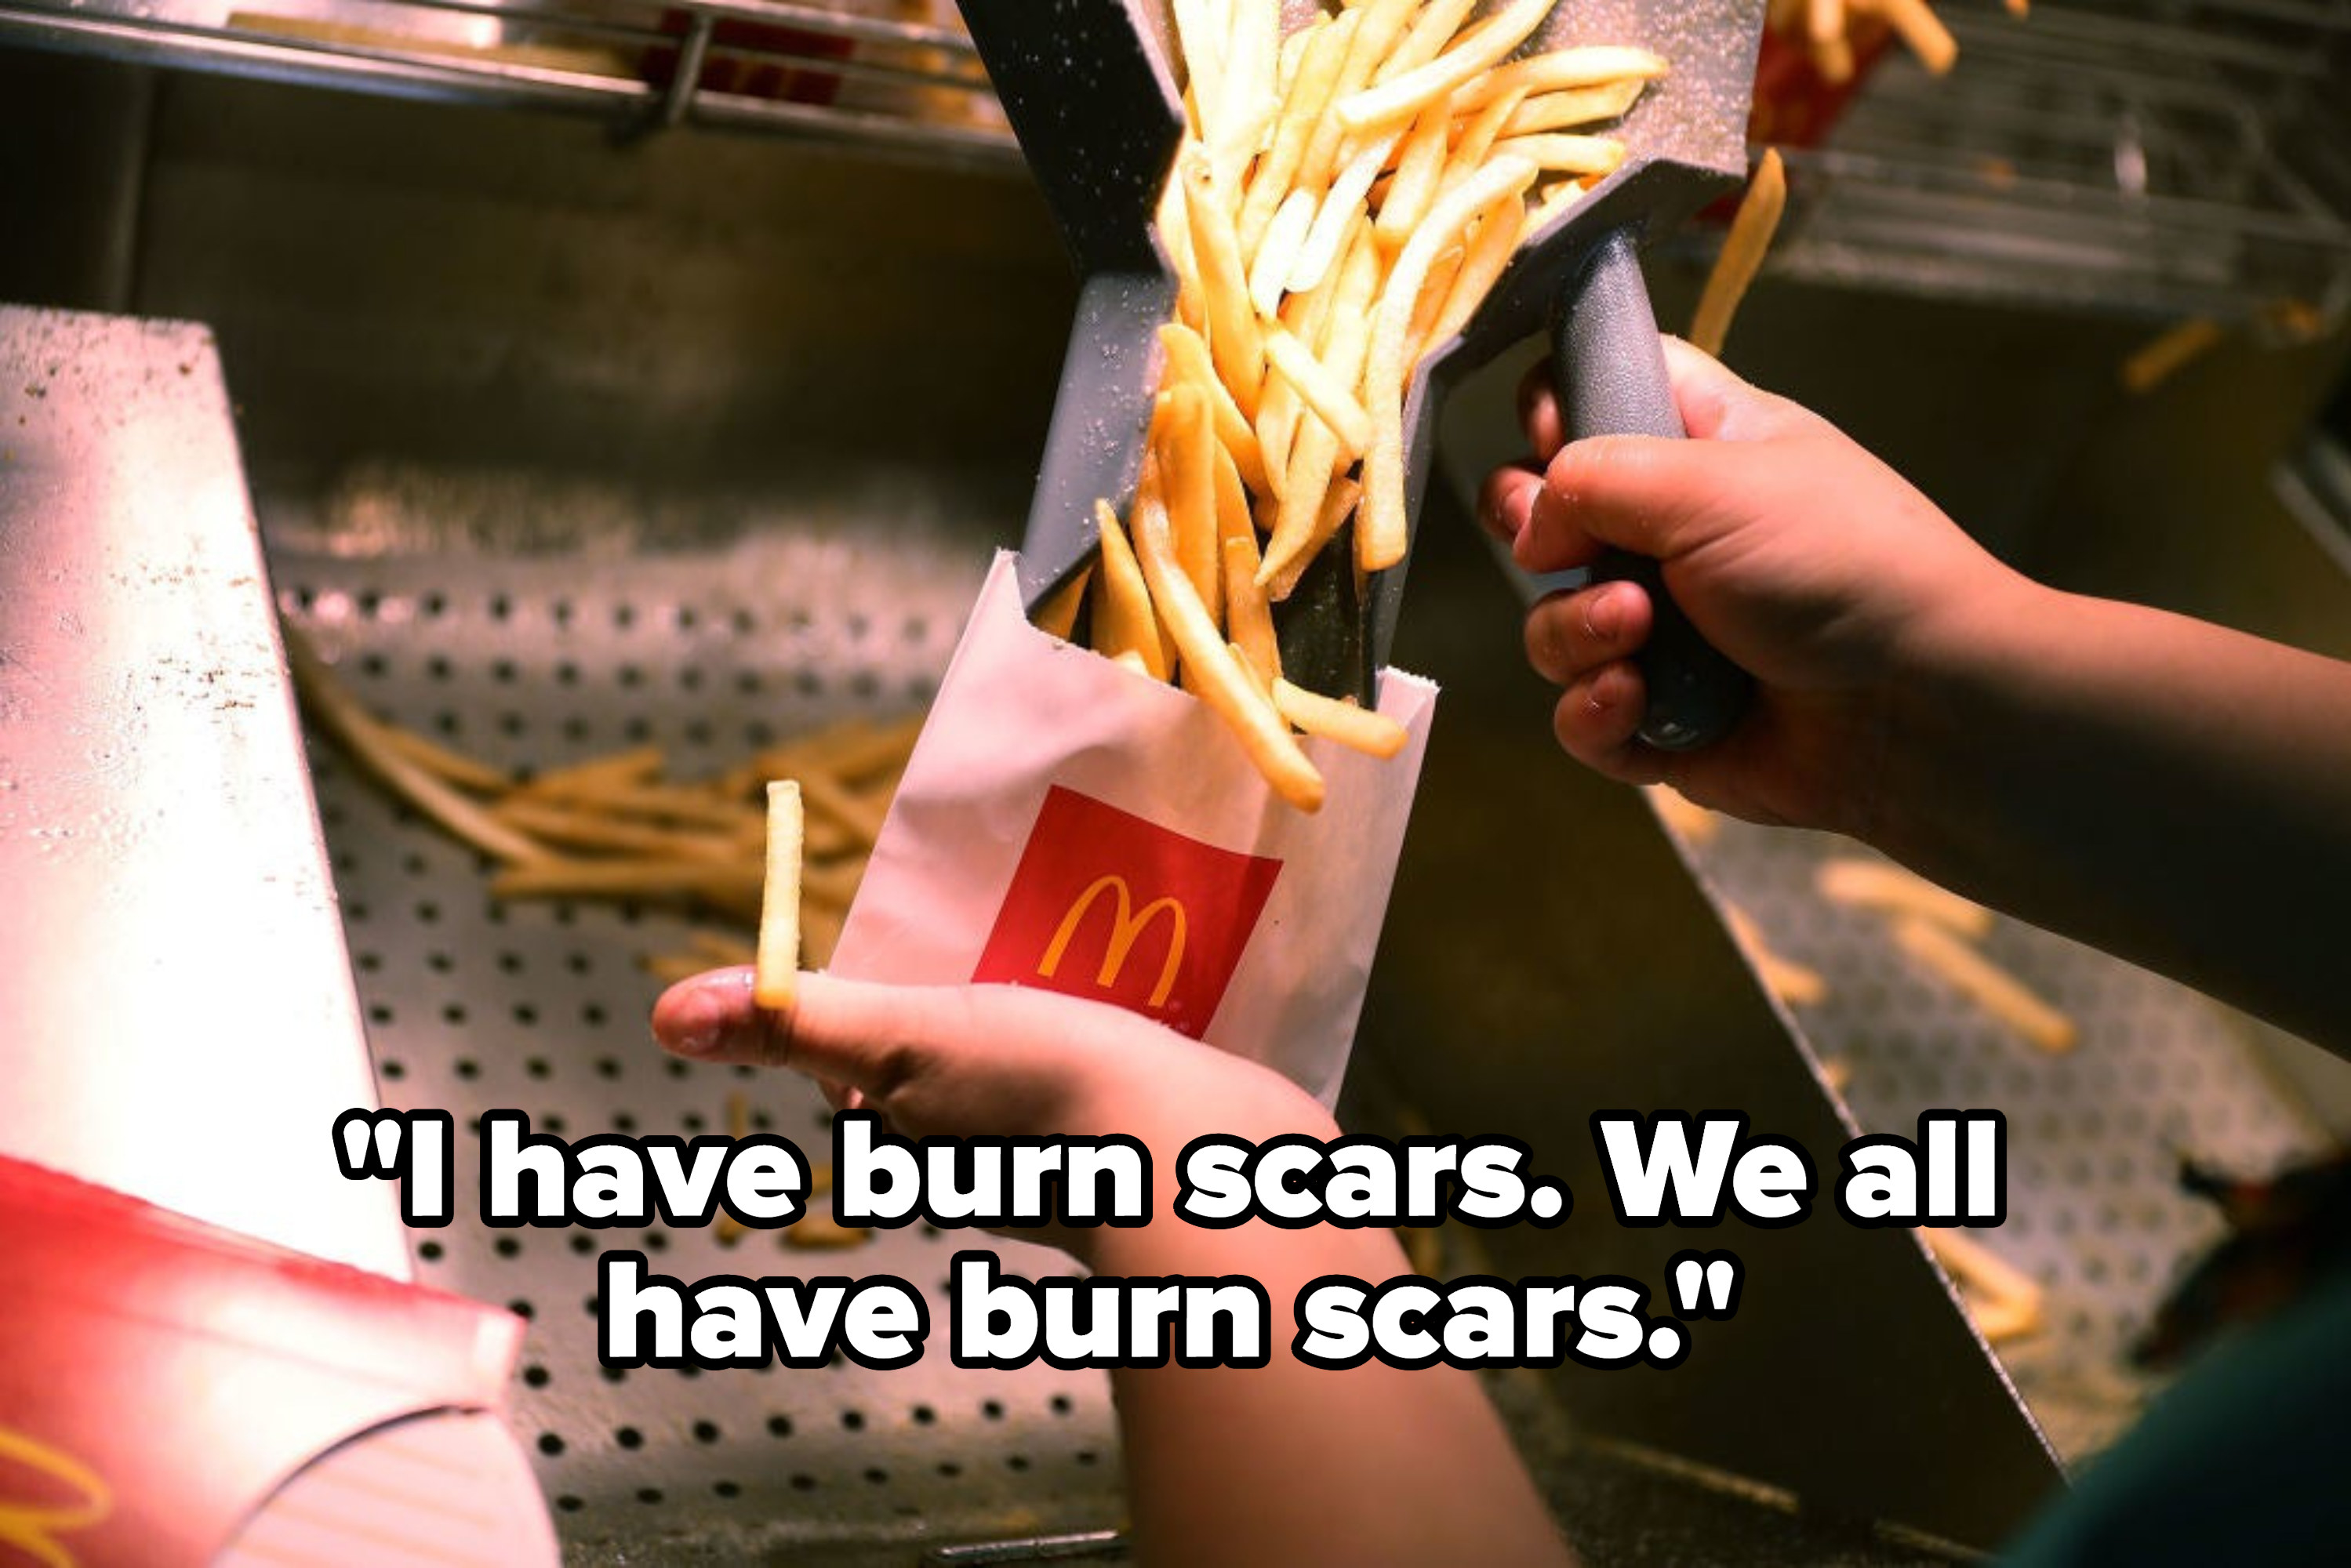 &quot;I have burn scars. We all have burn scars&quot; over an employee filling a bag of mcdonalds fries